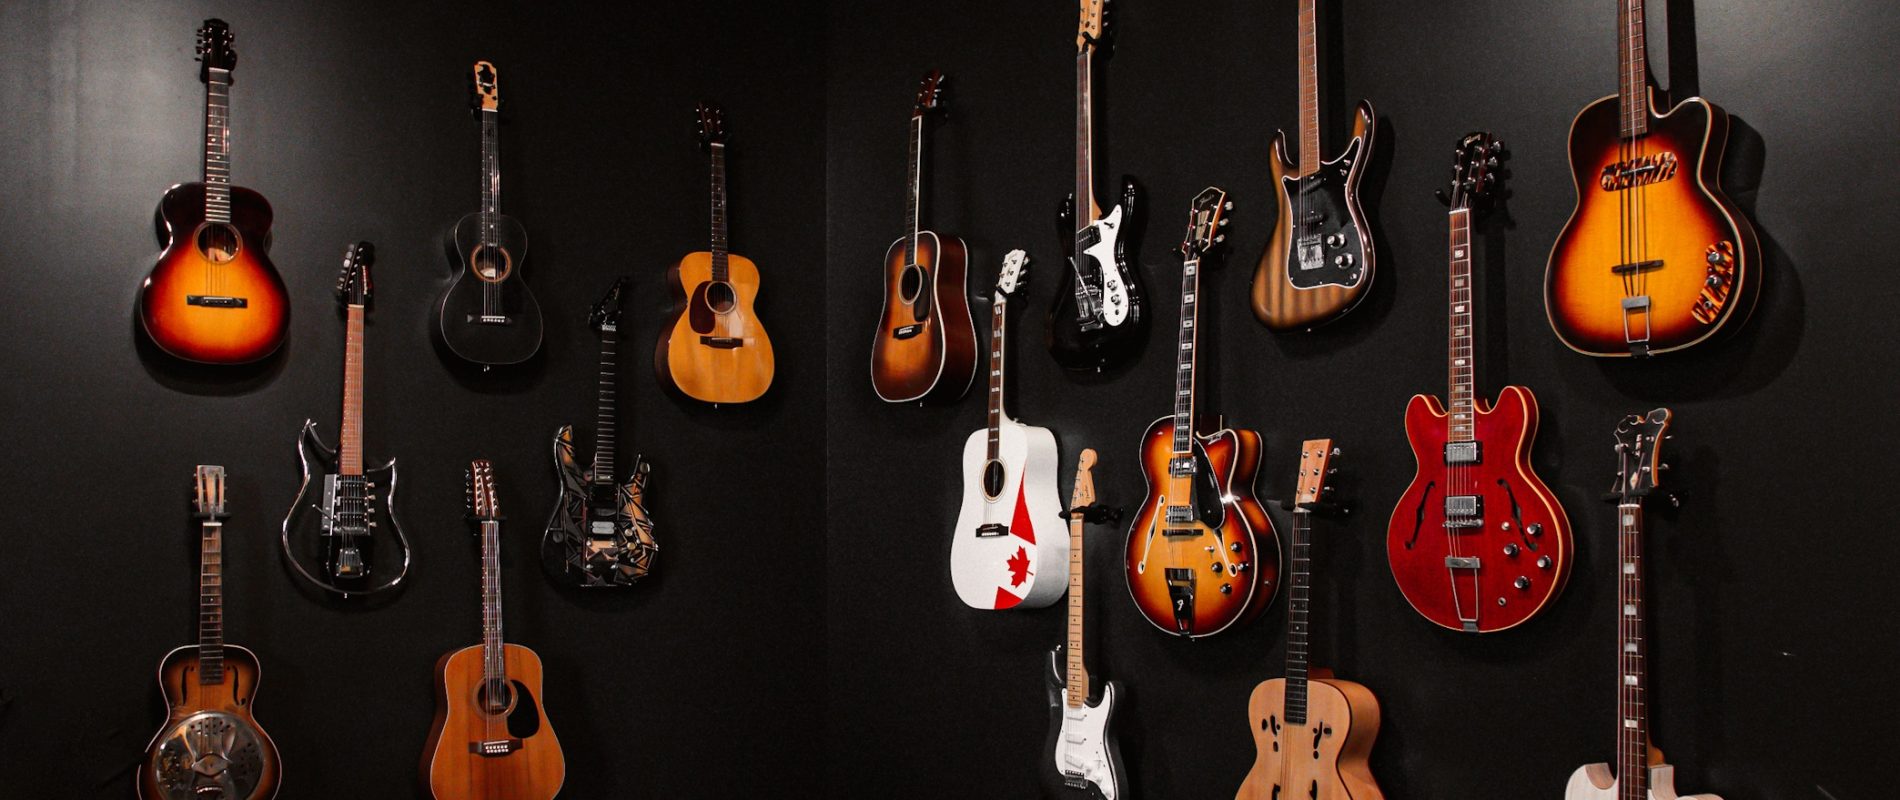 National Music Centre Proclaims 2023 “The Year of the Guitar” with Guitar-Centric Exhibitions and Events